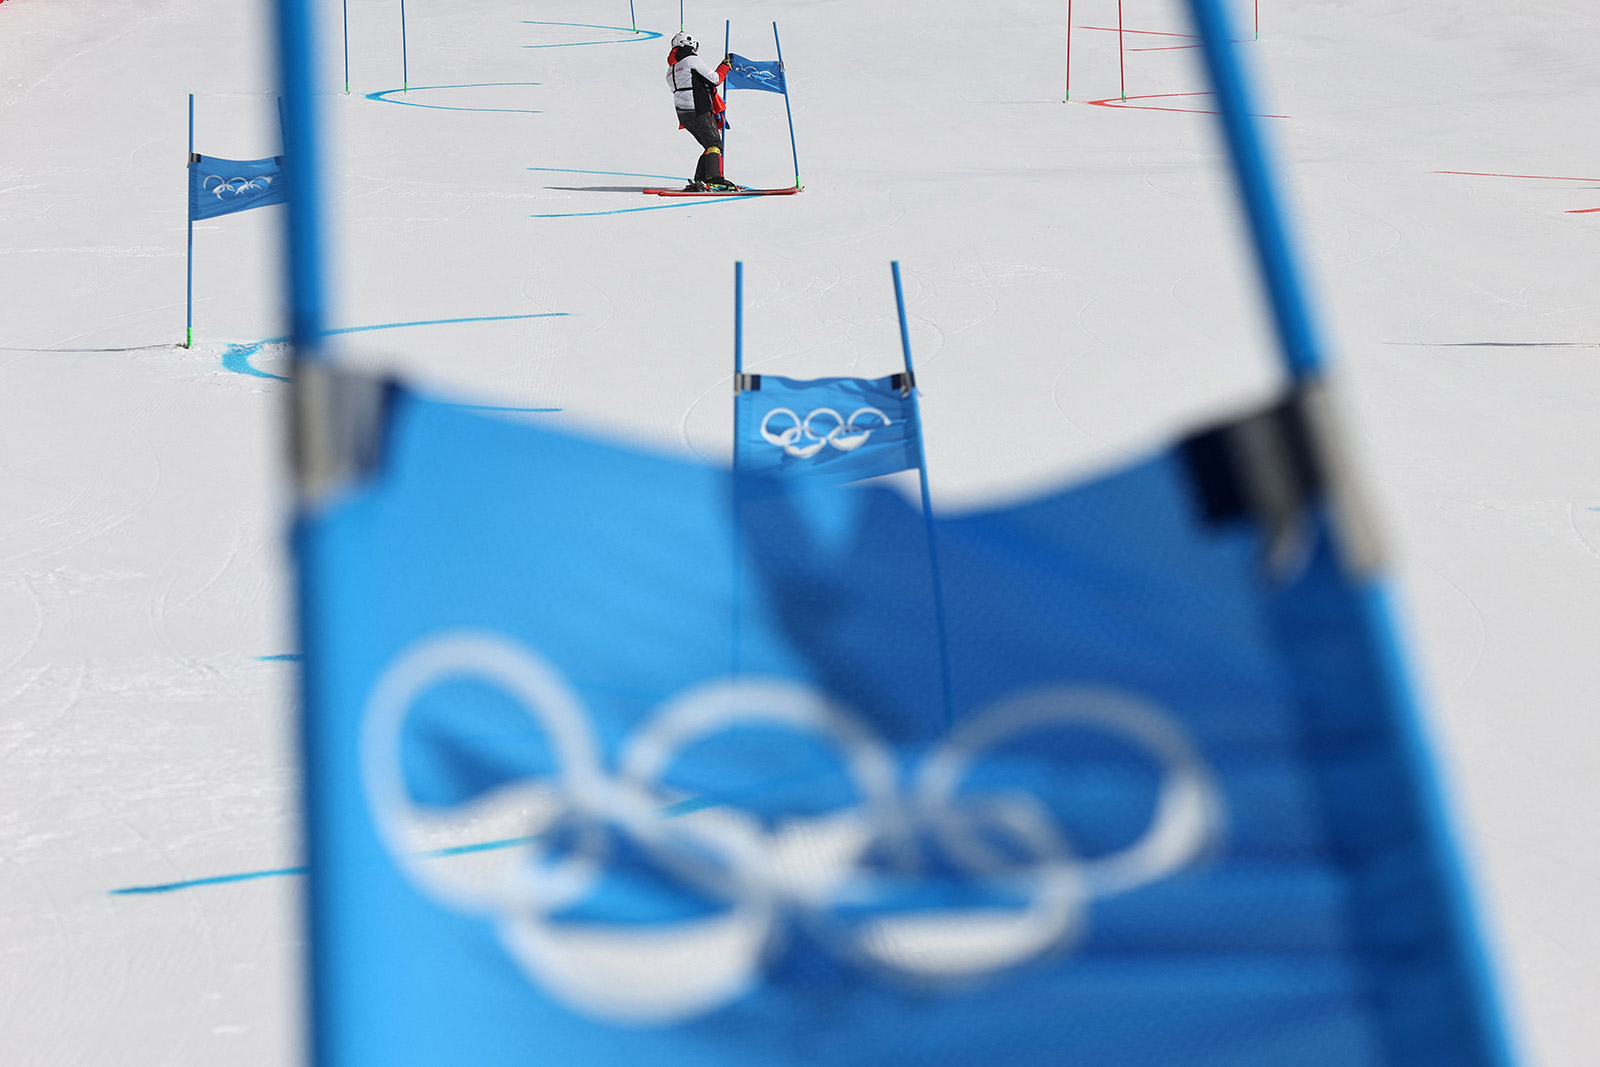 A course technician removes flags from the alpine skiing course due to strong winds on Saturday.